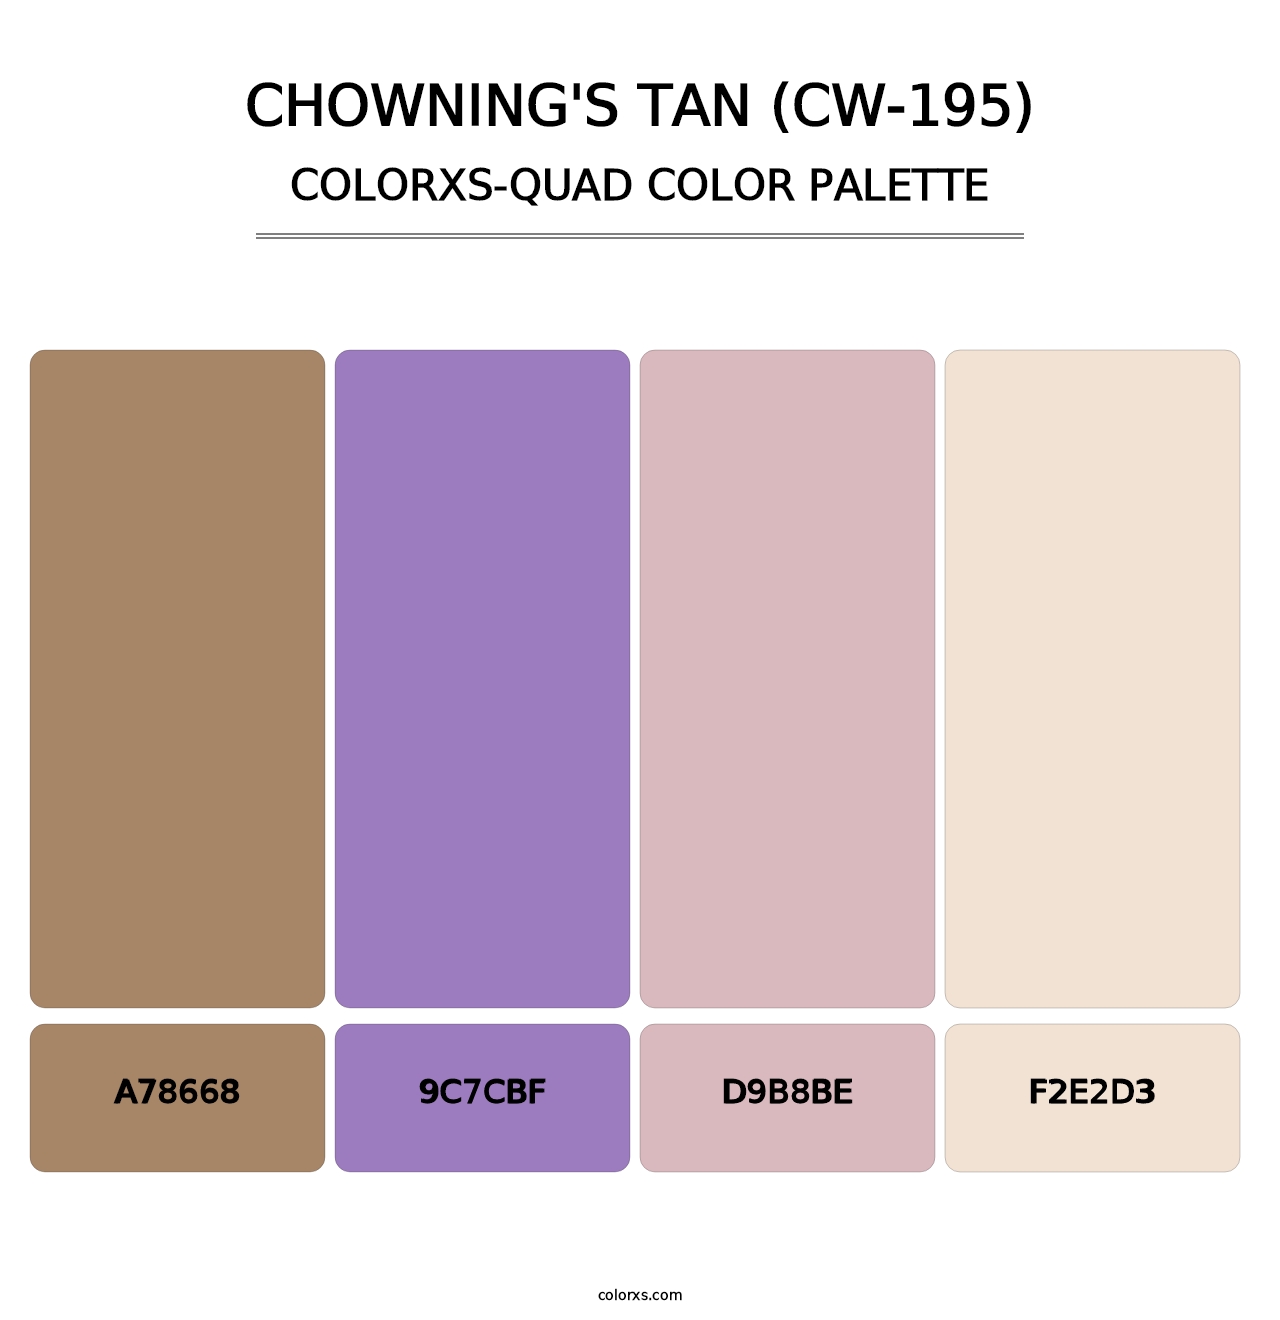 Chowning's Tan (CW-195) - Colorxs Quad Palette